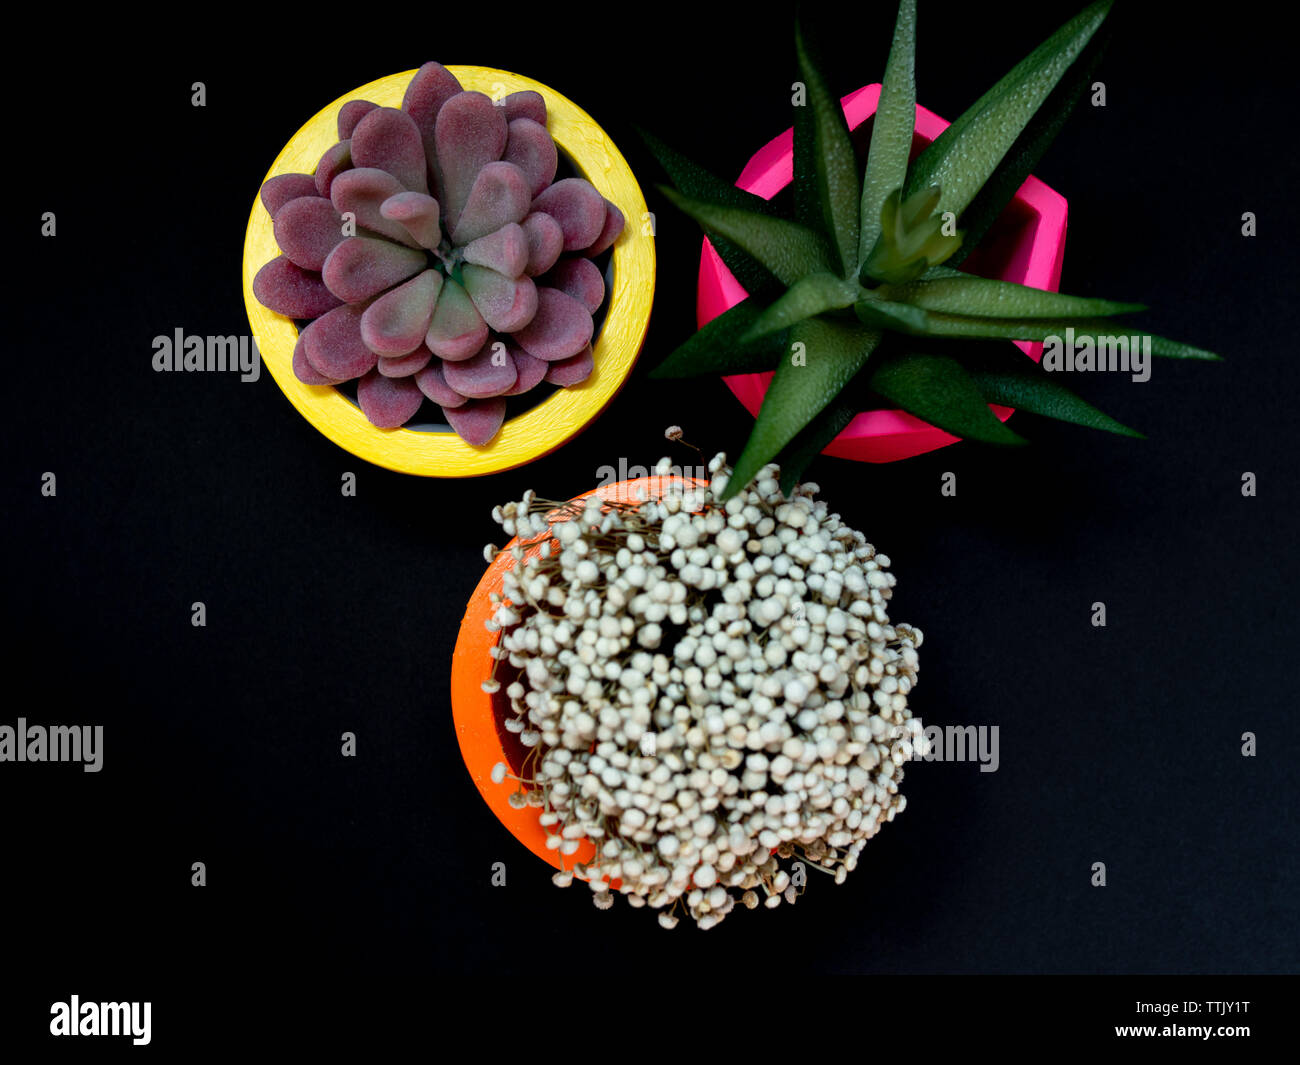 Beautiful various geometric concrete planters with cactus, flower and succulent plant on dark background. Top view of colorful painted concrete pots f Stock Photo